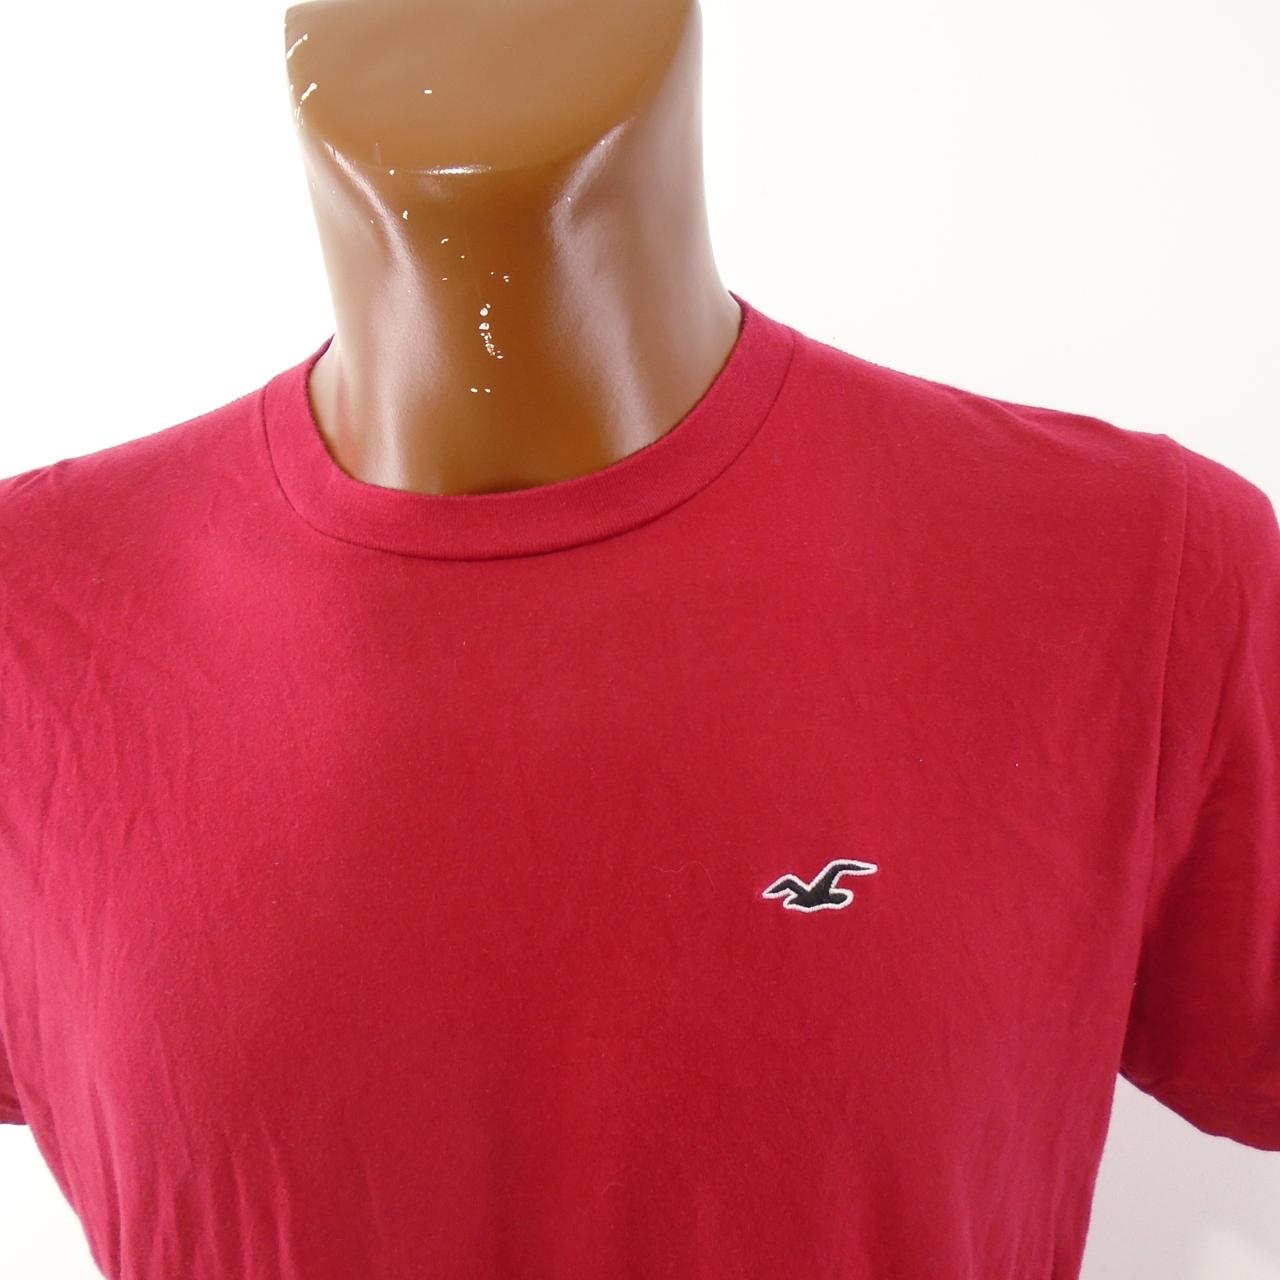 Men's T-Shirt Hollister. Red. L. Used. Good